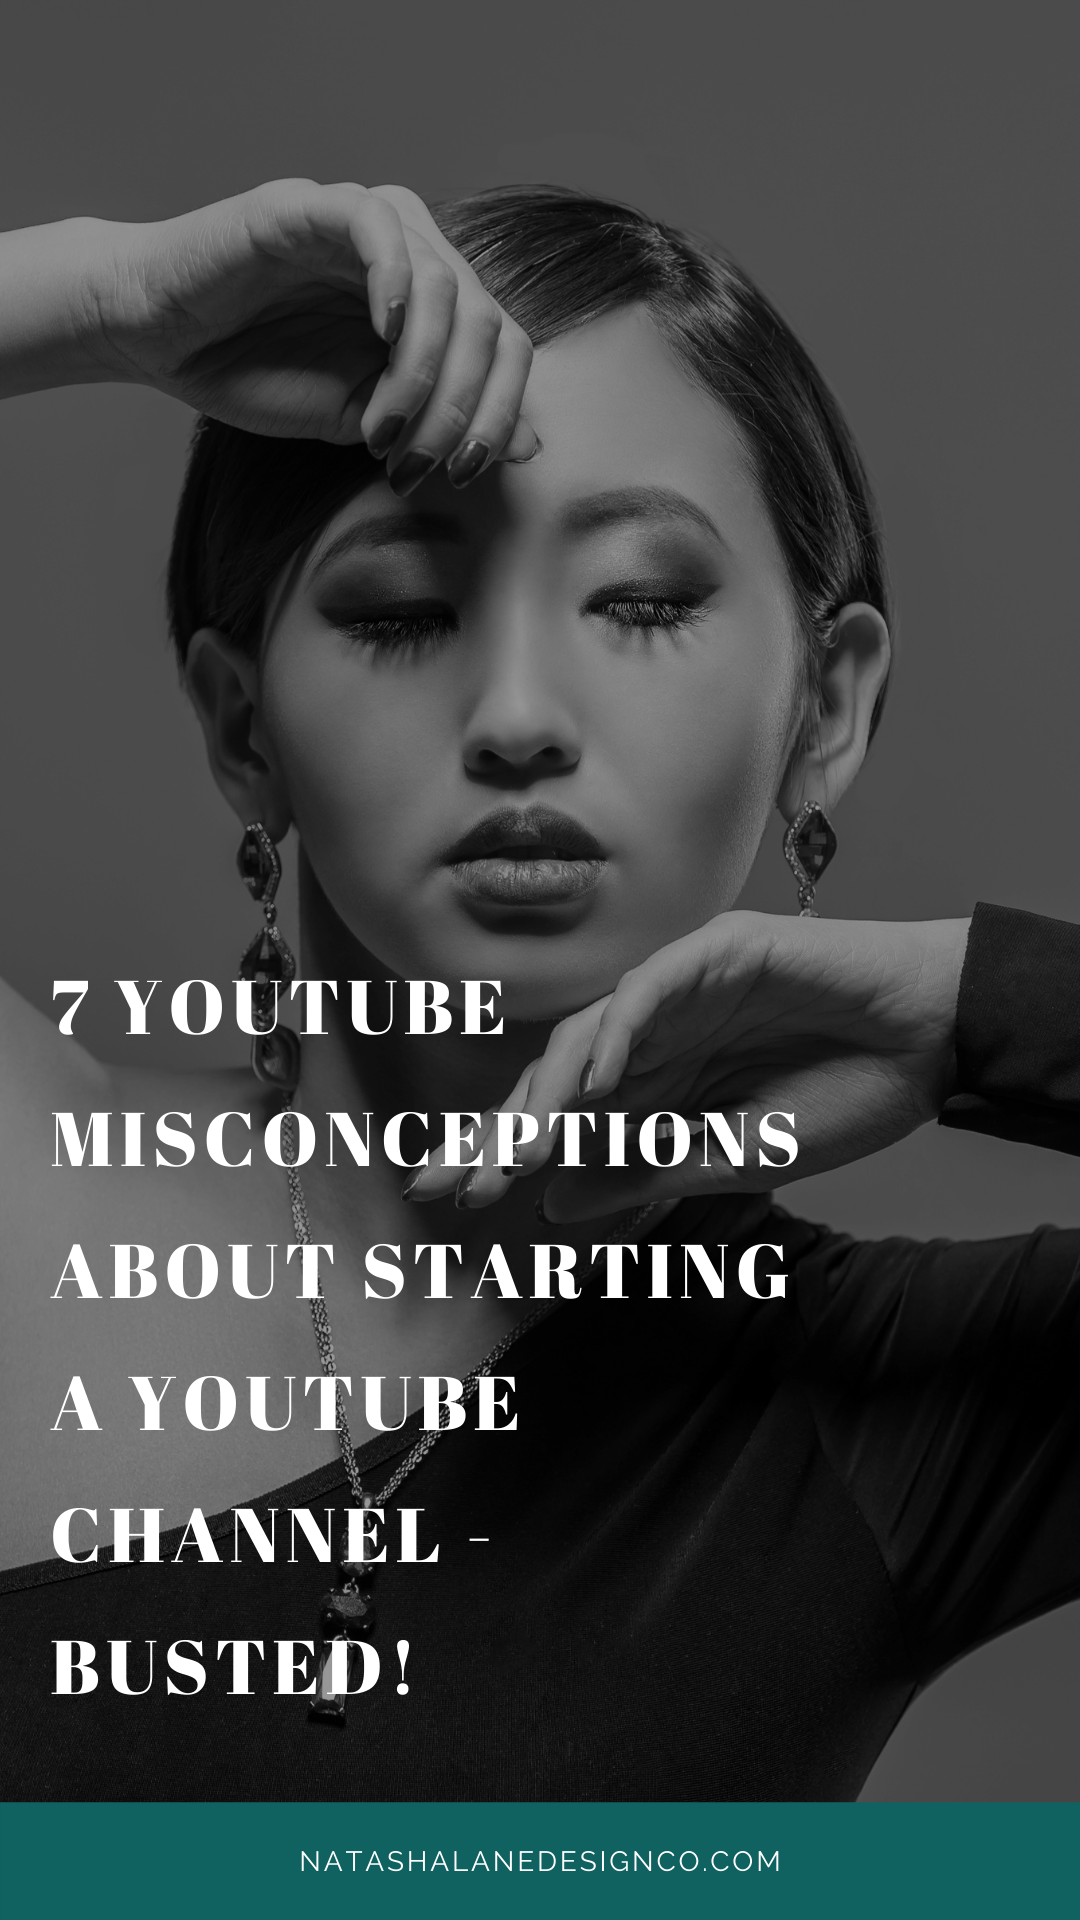 7 YouTube misconceptions about starting a YouTube channel – busted!